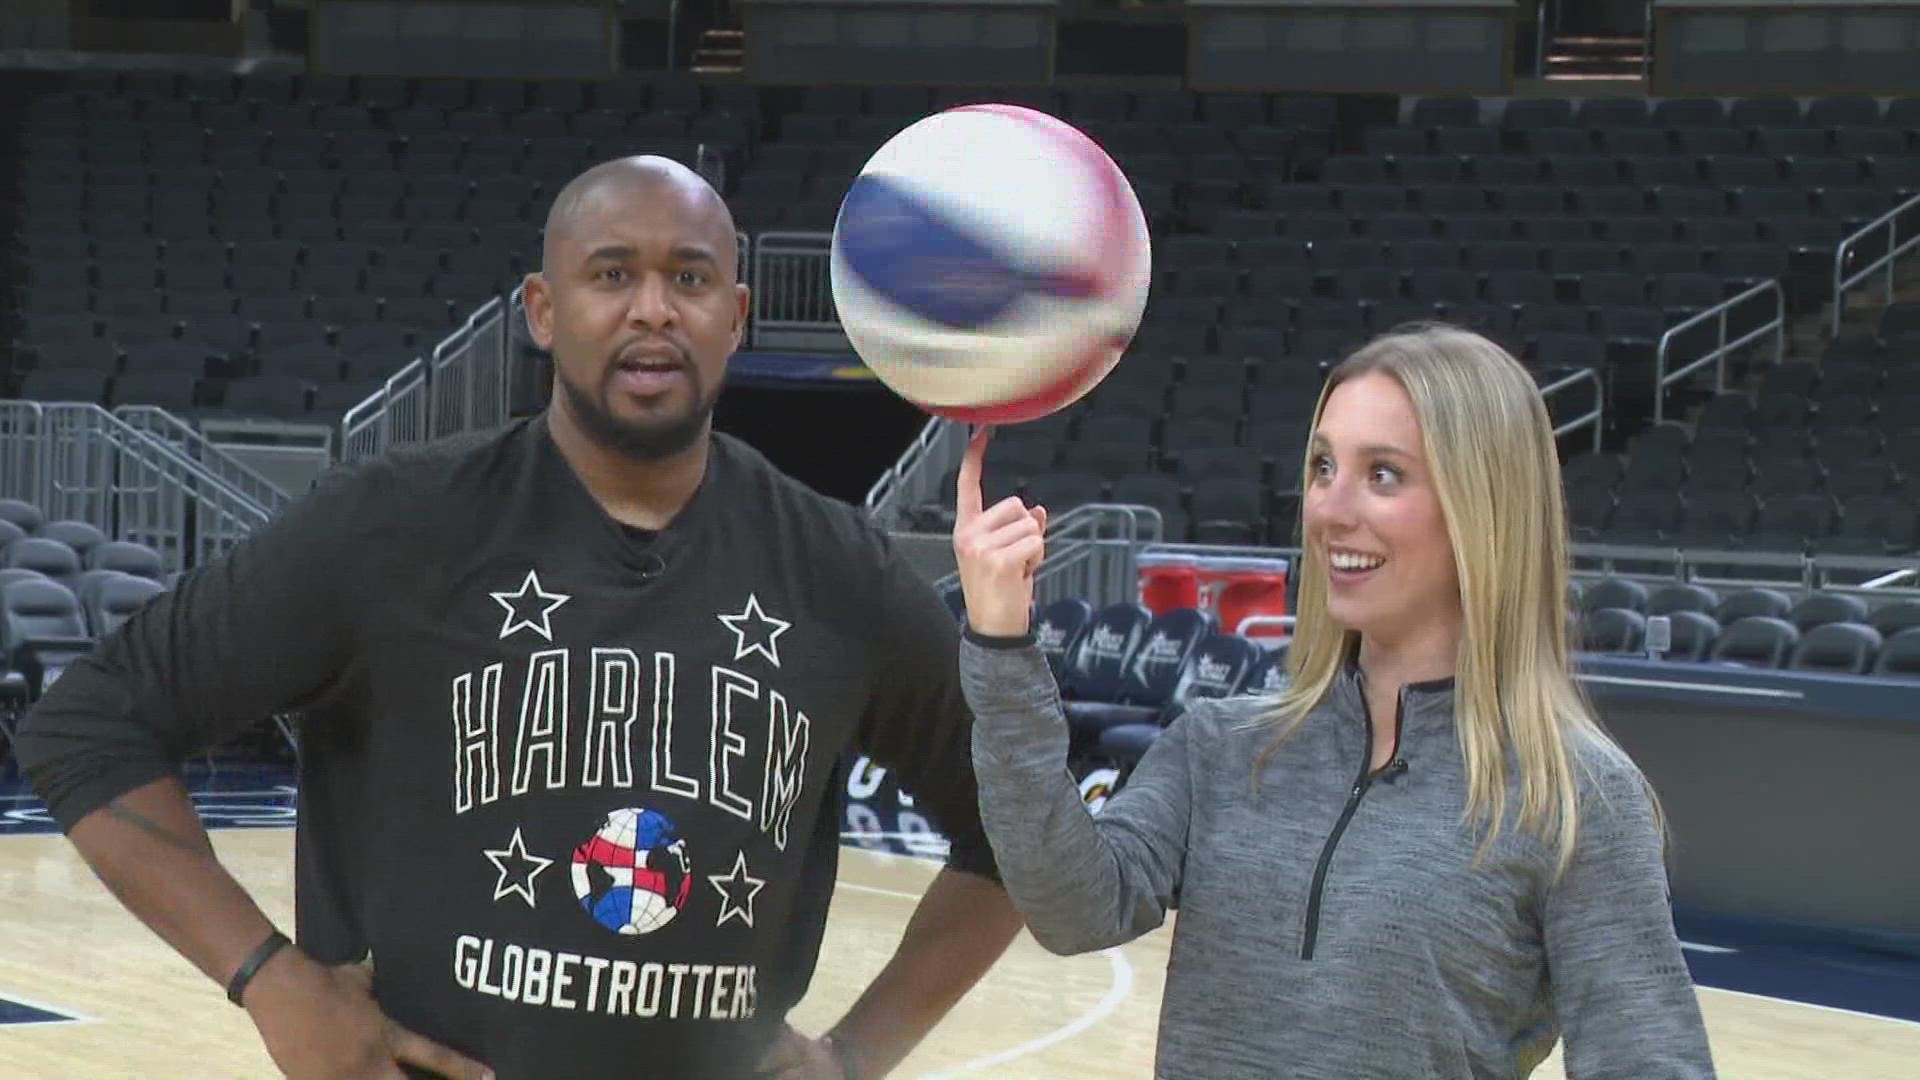 The Harlem Globetrotters will play in Indianapolis on Sunday, Jan. 15 at 12:30 p.m. and 5:30 p.m. ET.